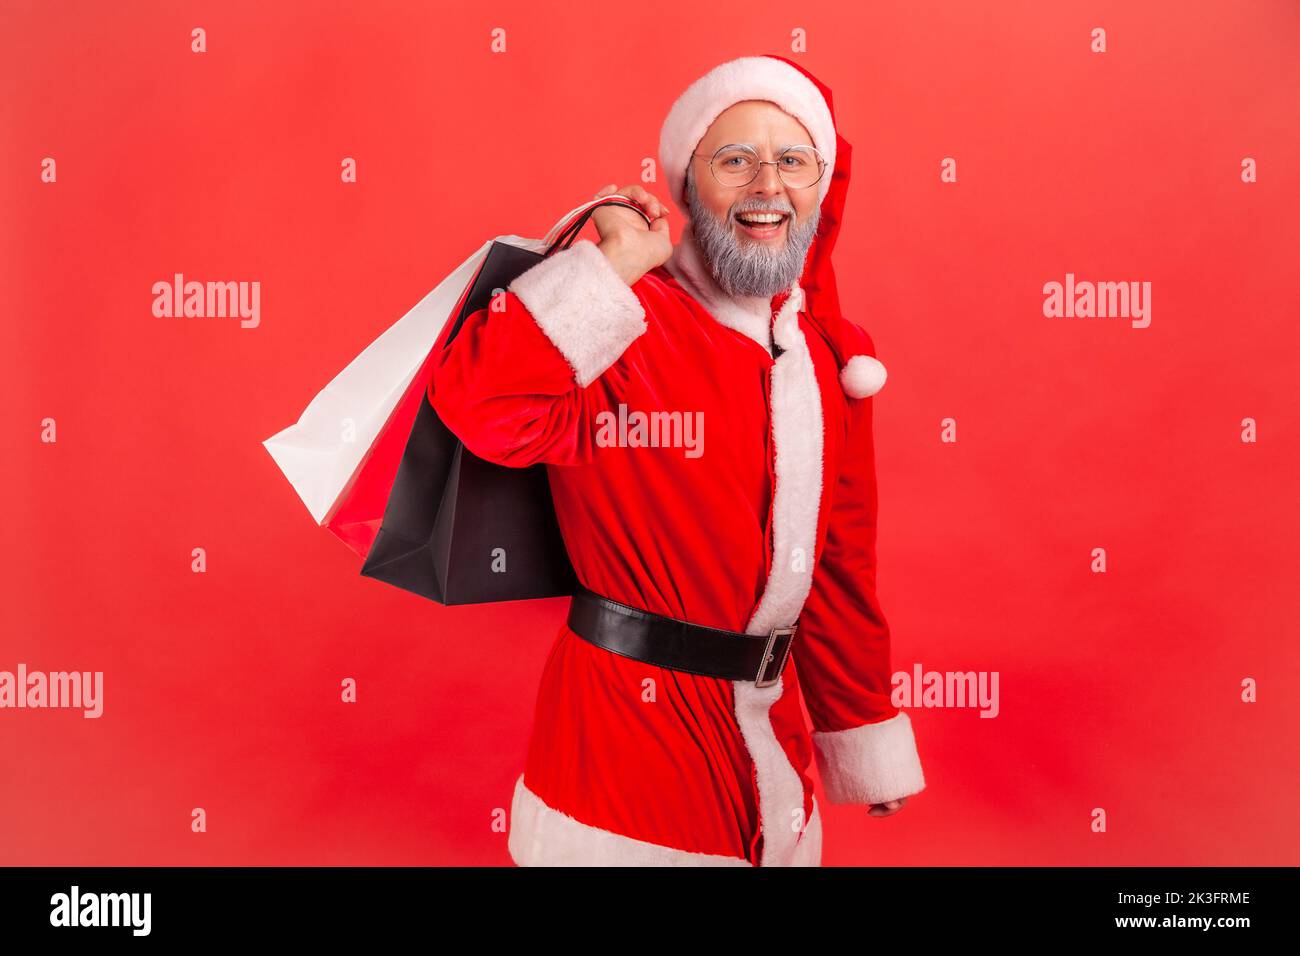 Portrait of smiling elderly man with gray beard wearing santa claus costume standing with shopping bags, buying present for winter holidays. Indoor studio shot isolated on red background. Stock Photo